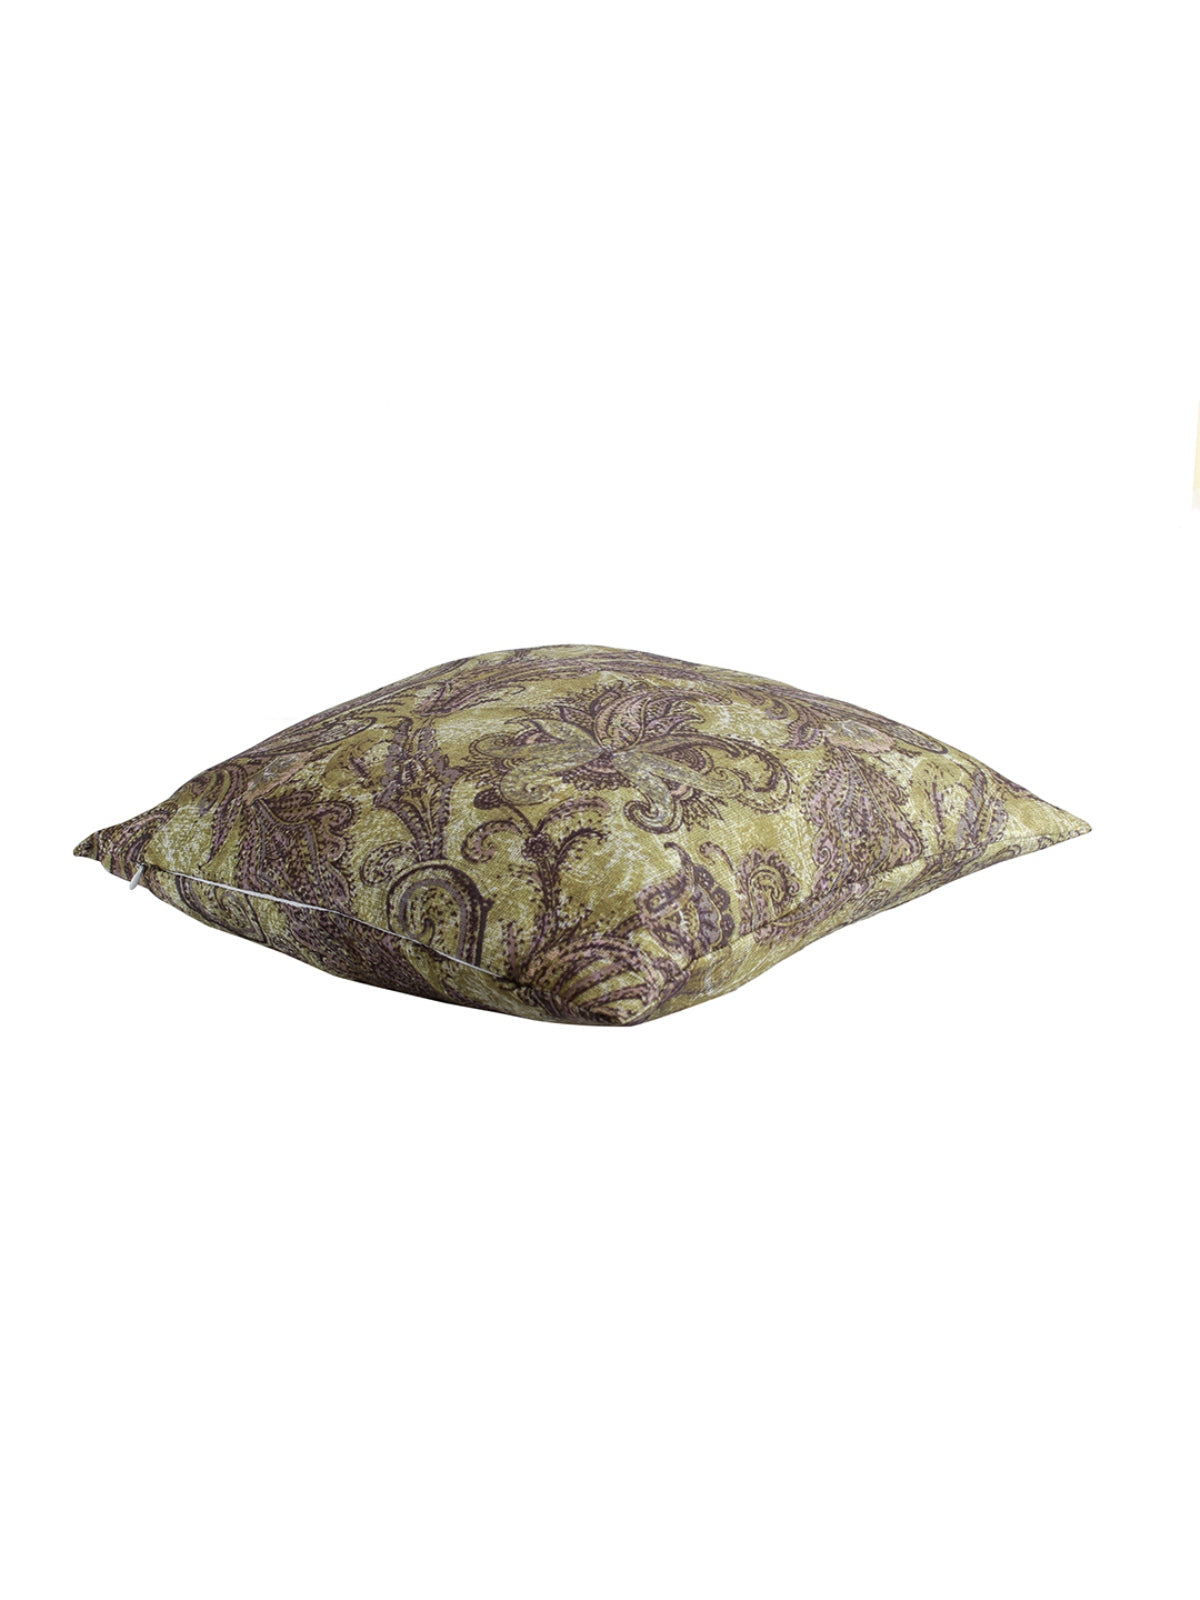 Floral Polyester Cushion Cover 16x16 Inch, Set of 5 - Green